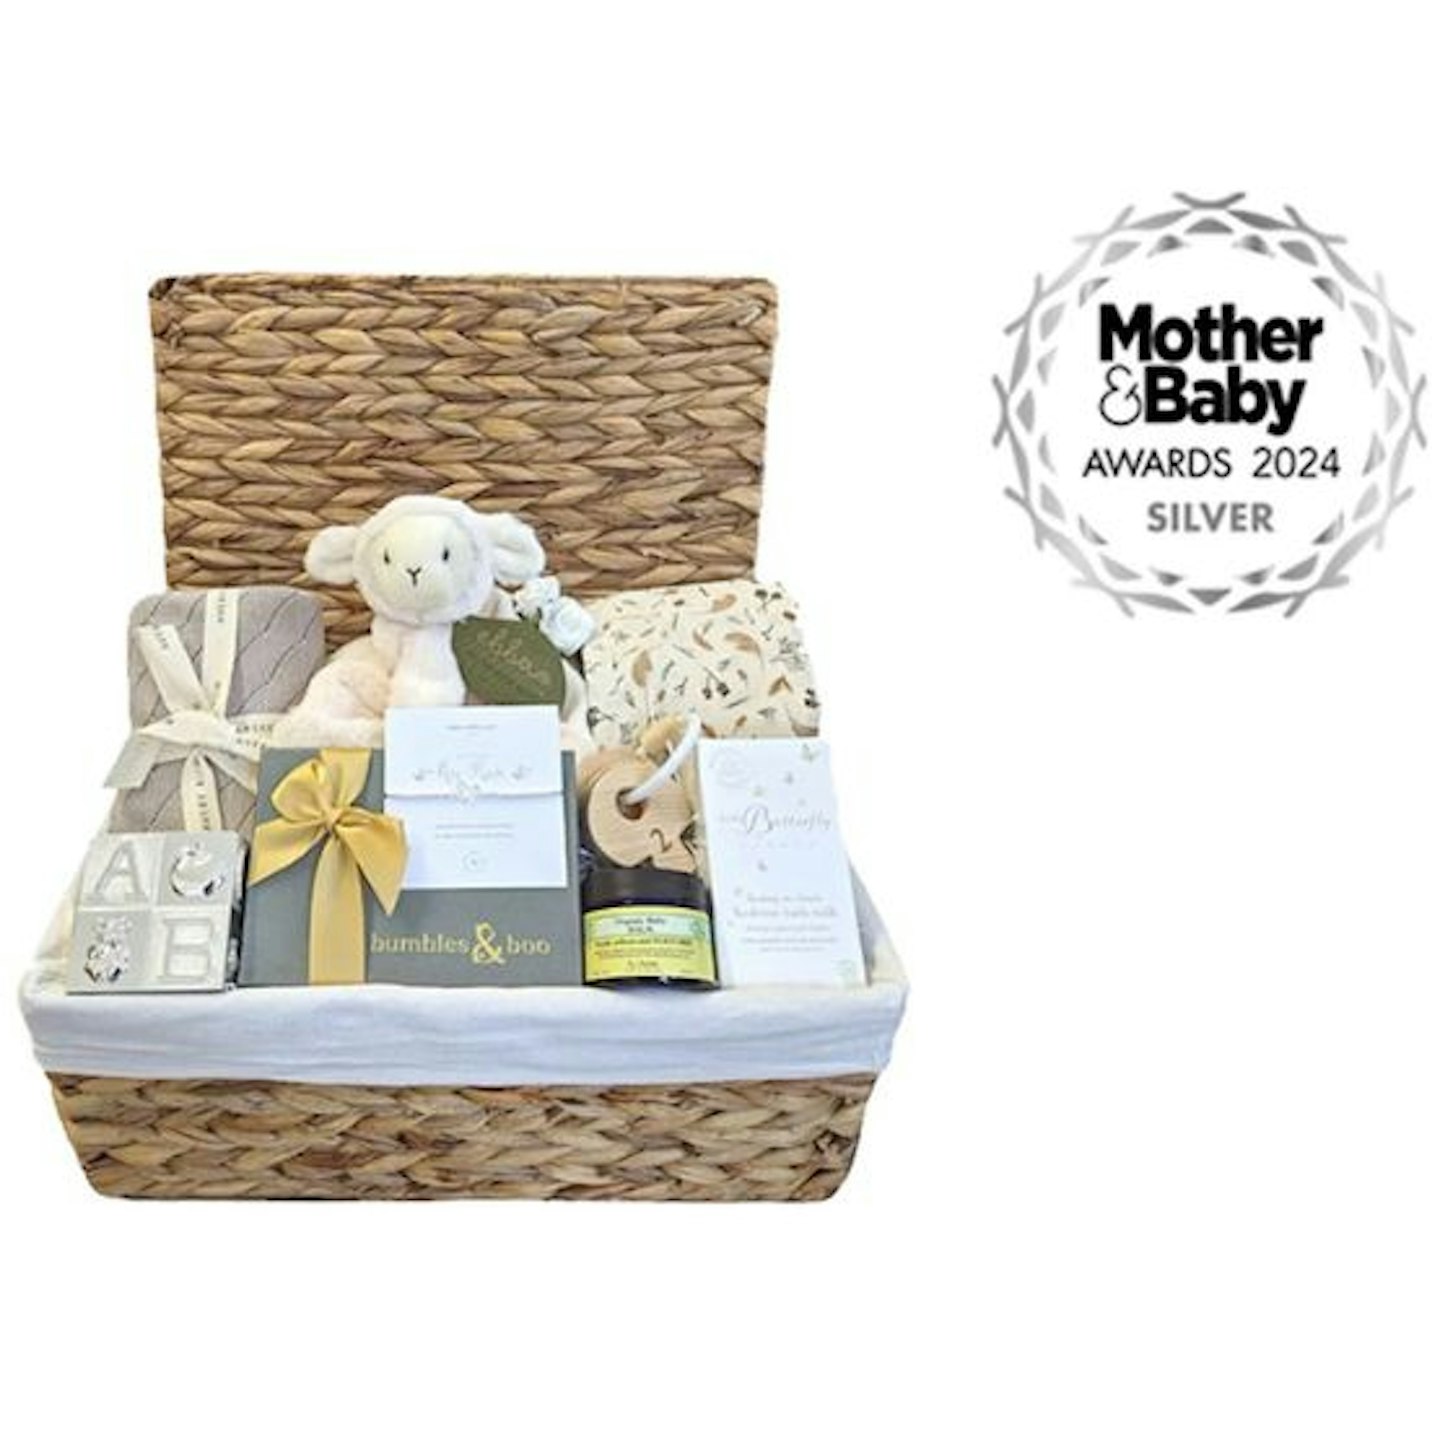 Bumbles & Boo New Mum Gift Hampers